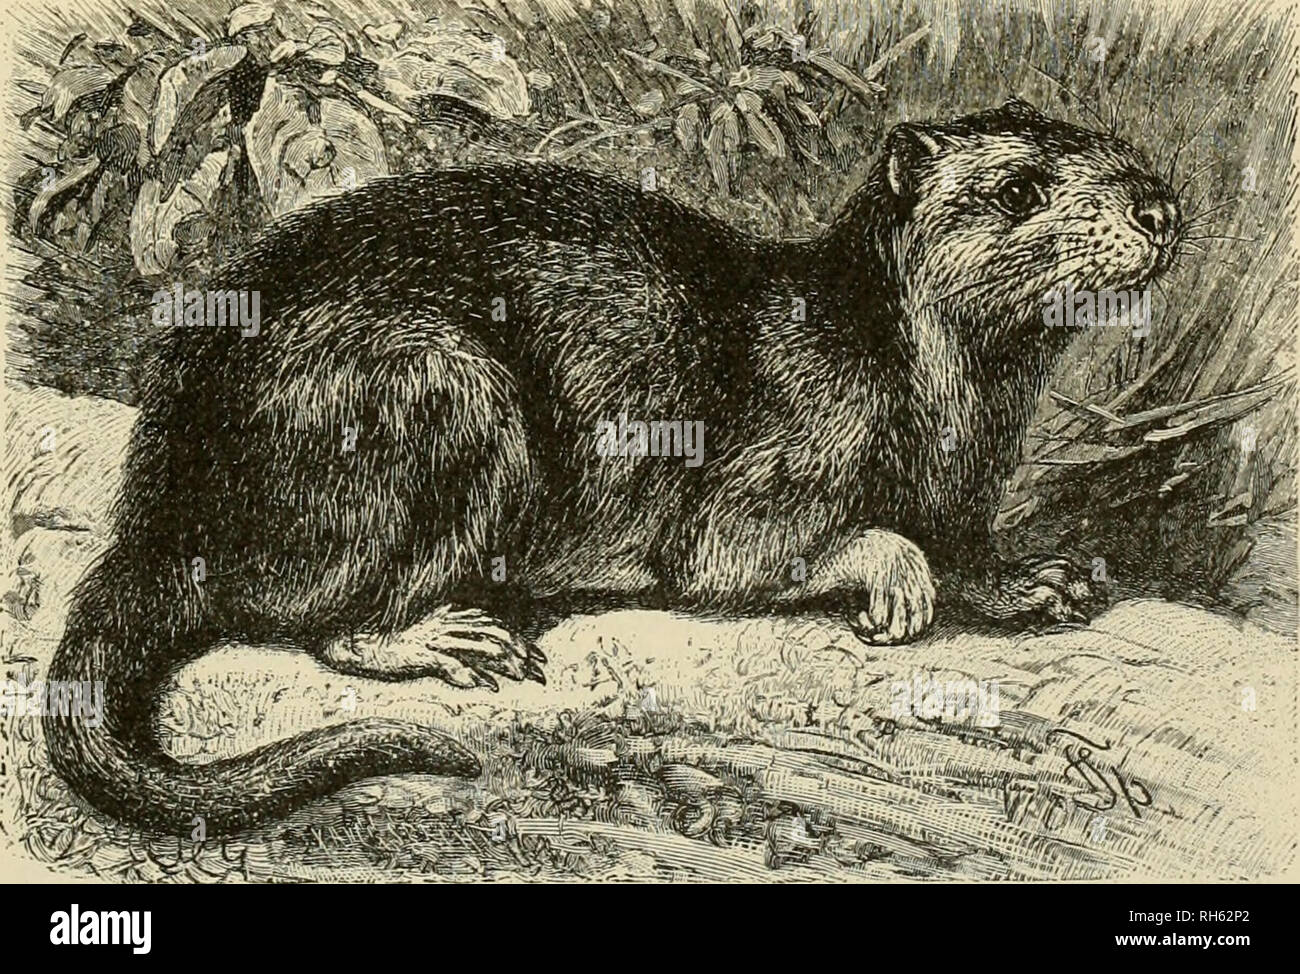 . Brehm's Life of animals : a complete natural history for popular home instruction and for the use of schools. Mammals; Animal behavior. THE TUCO-TUCO. A member of the Octodon family of Rodents which forms a distinct genus is an inhabitant of Patagonia, called by the native tribes Tuco-tuco. It has five toes on each foot, the innermost toe being much shorter than the other four. It measures about ten inches, of which about two and a half inches belong to the tail. The fur is brownish gray tinged with yellow, and lighter on the under portion. It inhabits the plains of Patagonia north of the Ri Stock Photo